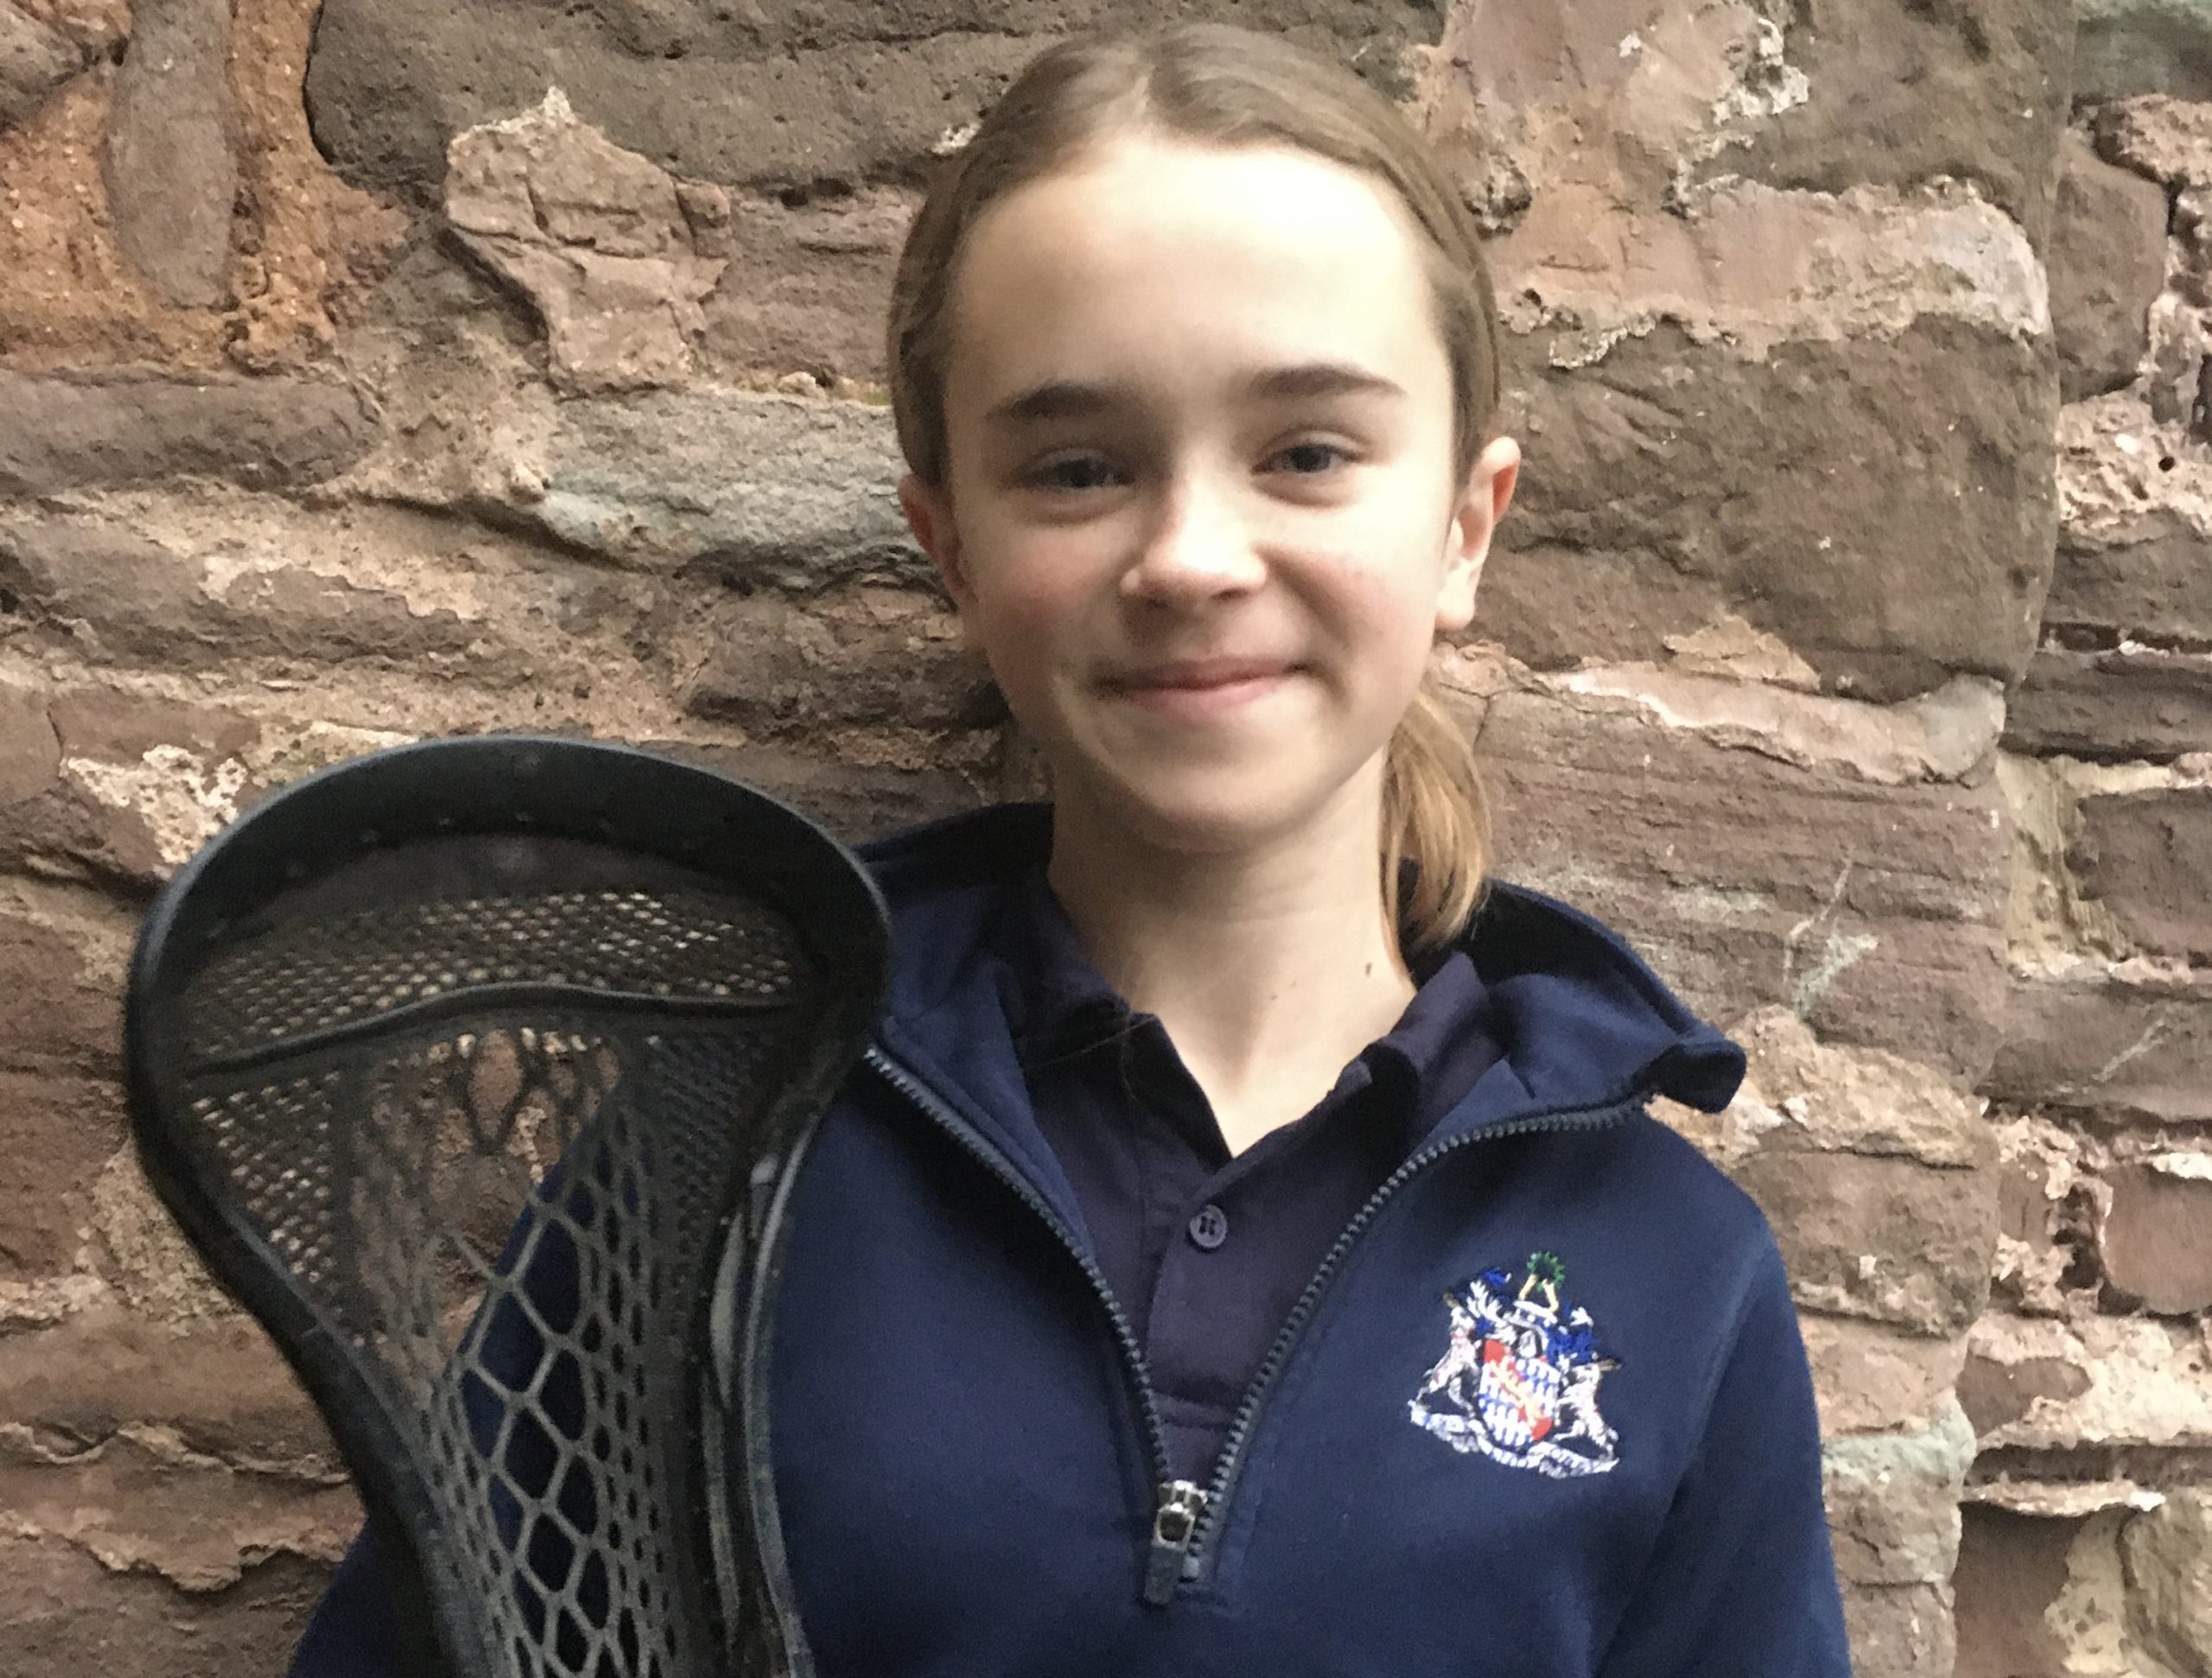 SPORT | Talented Herefordshire teen picked for England lacrosse pathway